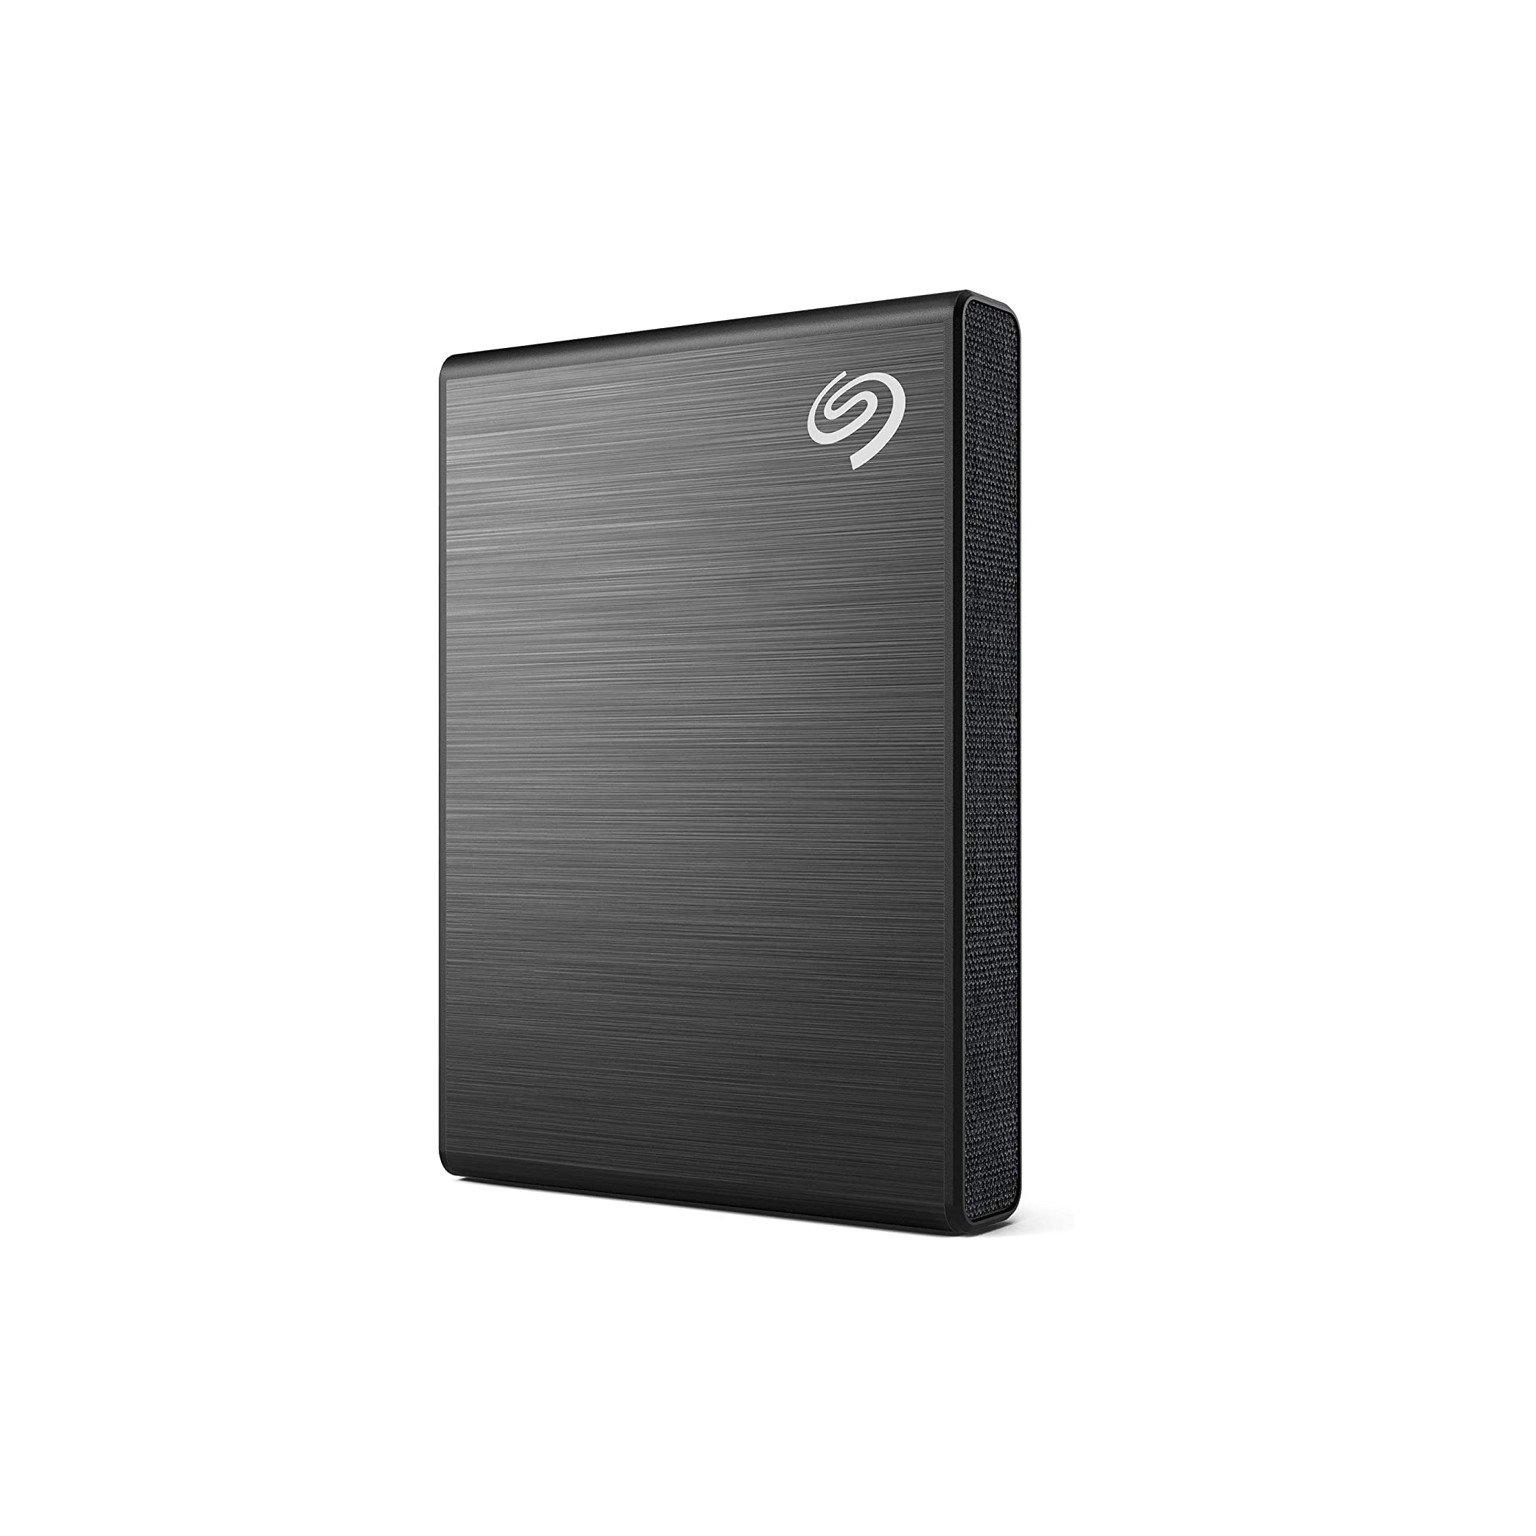 Seagate One Touch SSD 500GB - USB C - Black